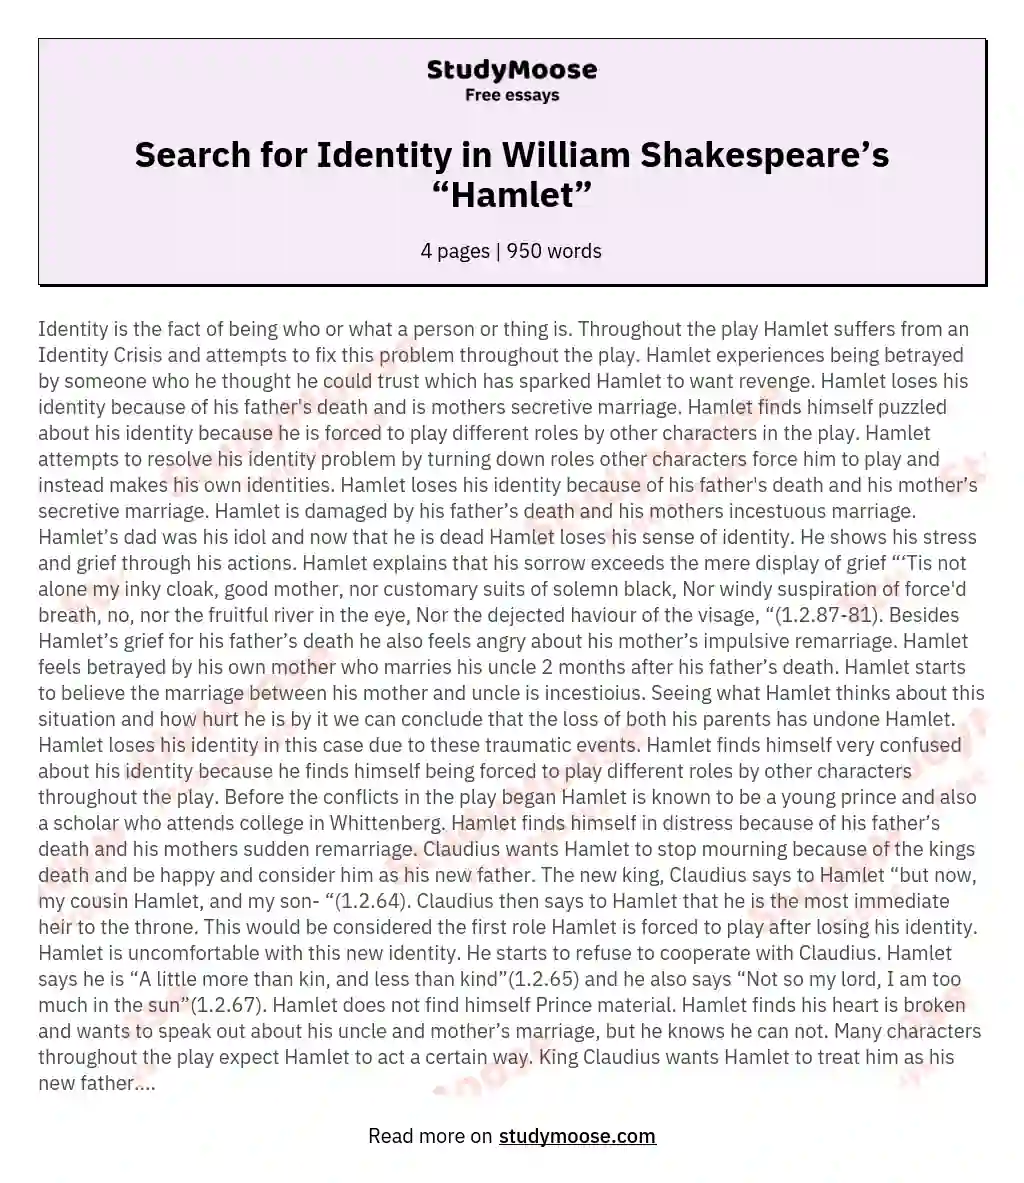 Search for Identity in William Shakespeare’s “Hamlet” essay